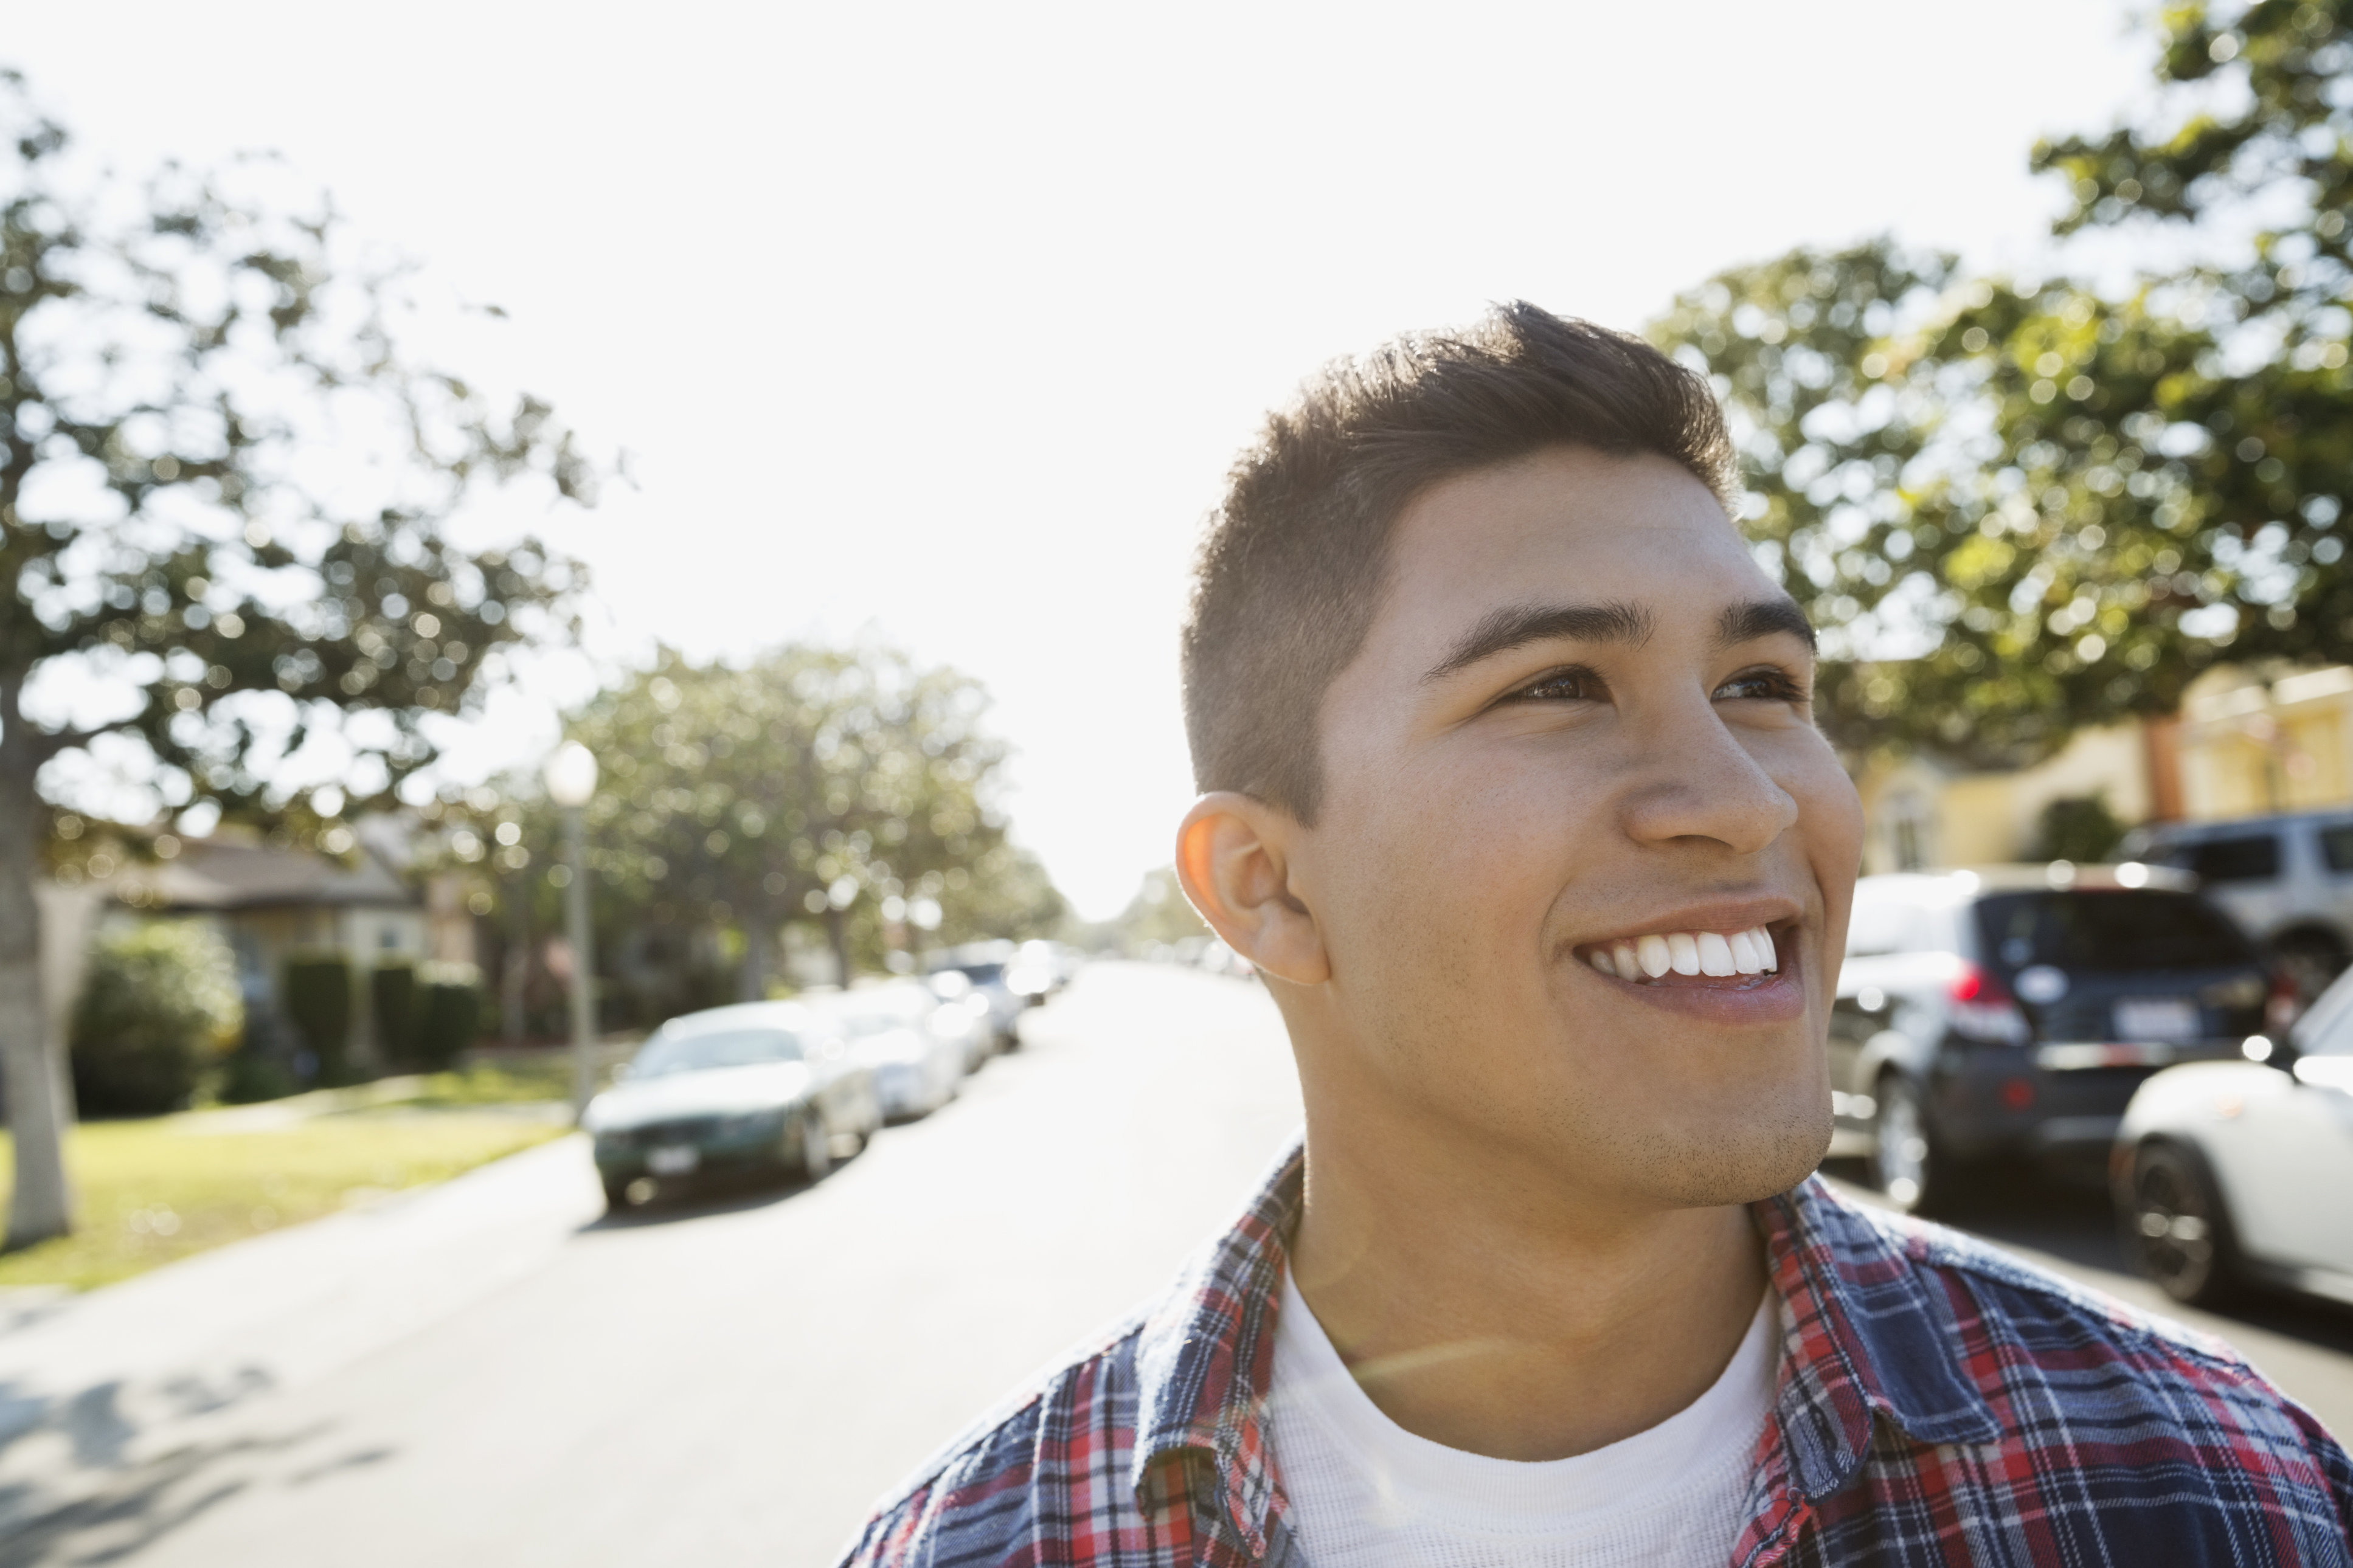 21 Stereotypes About Latino Men That Latino Men Want To Dispel Huffpost